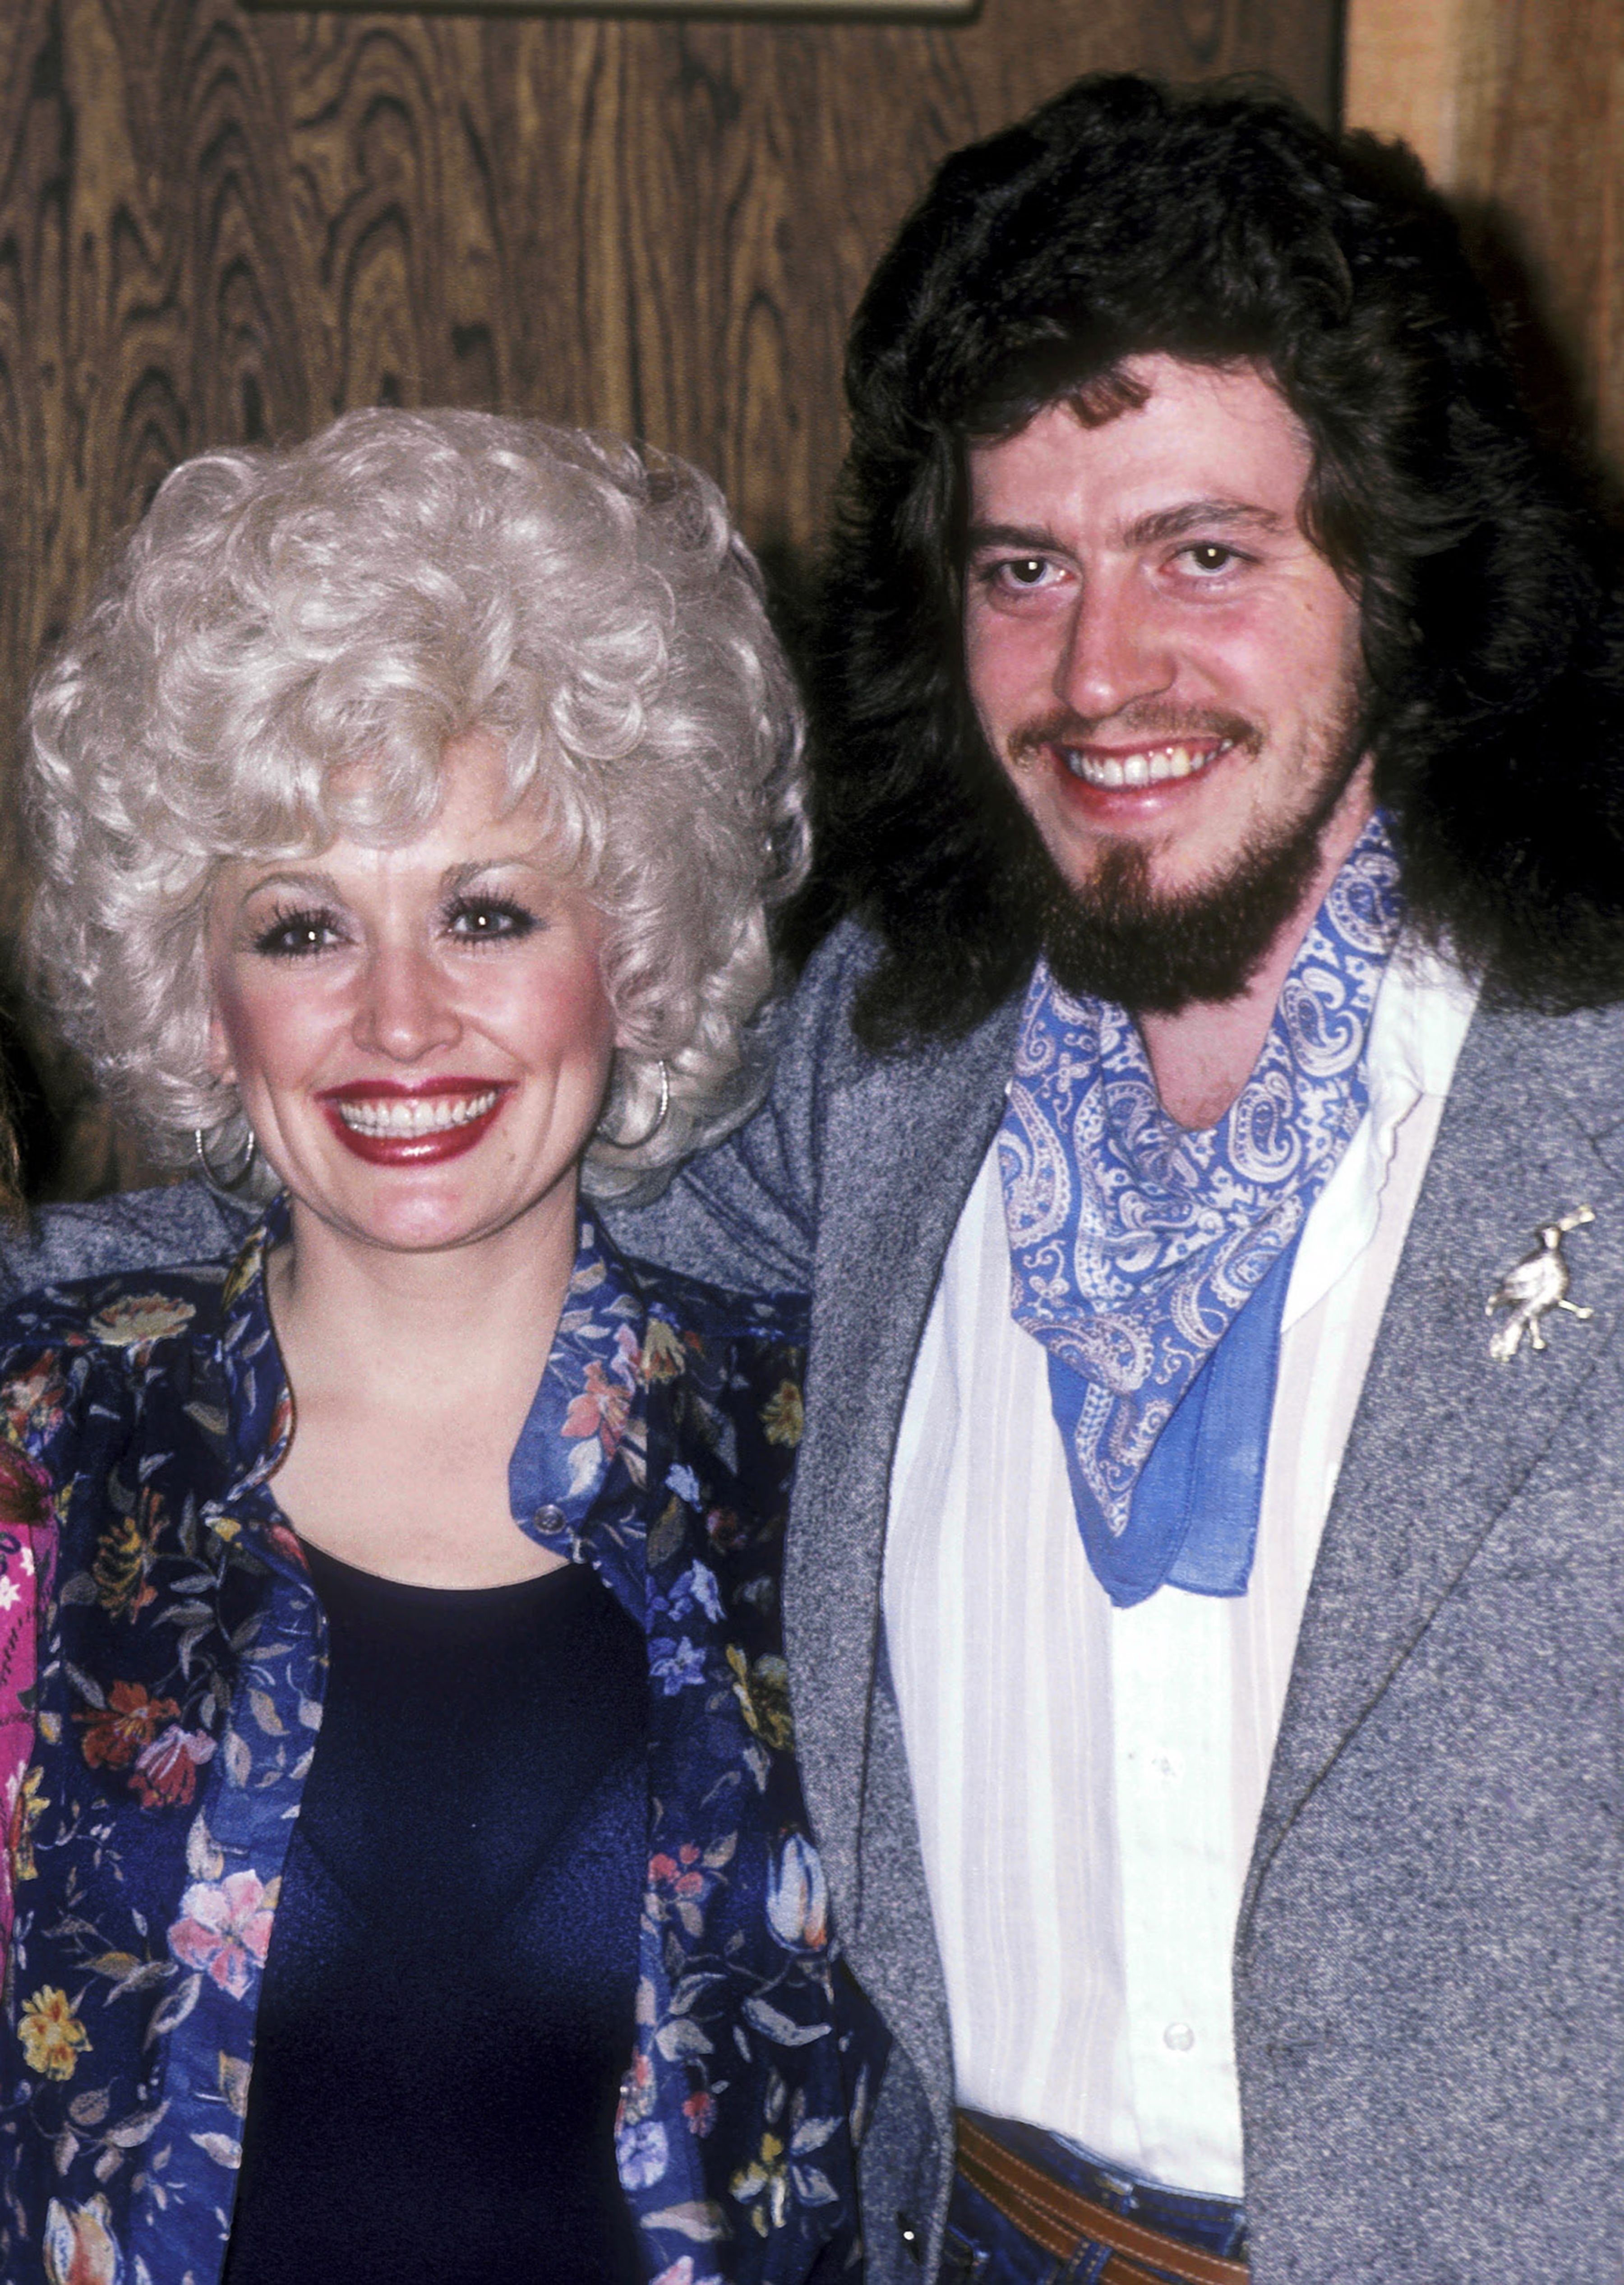 Dolly and her brother Floyd Parton at Bearsville Studios in North Hollywood, California for the recording of sister Freida Parton's self-titled album on January 15, 1981 | Photo: Ron Galella/Ron Galella Collection/Getty Images